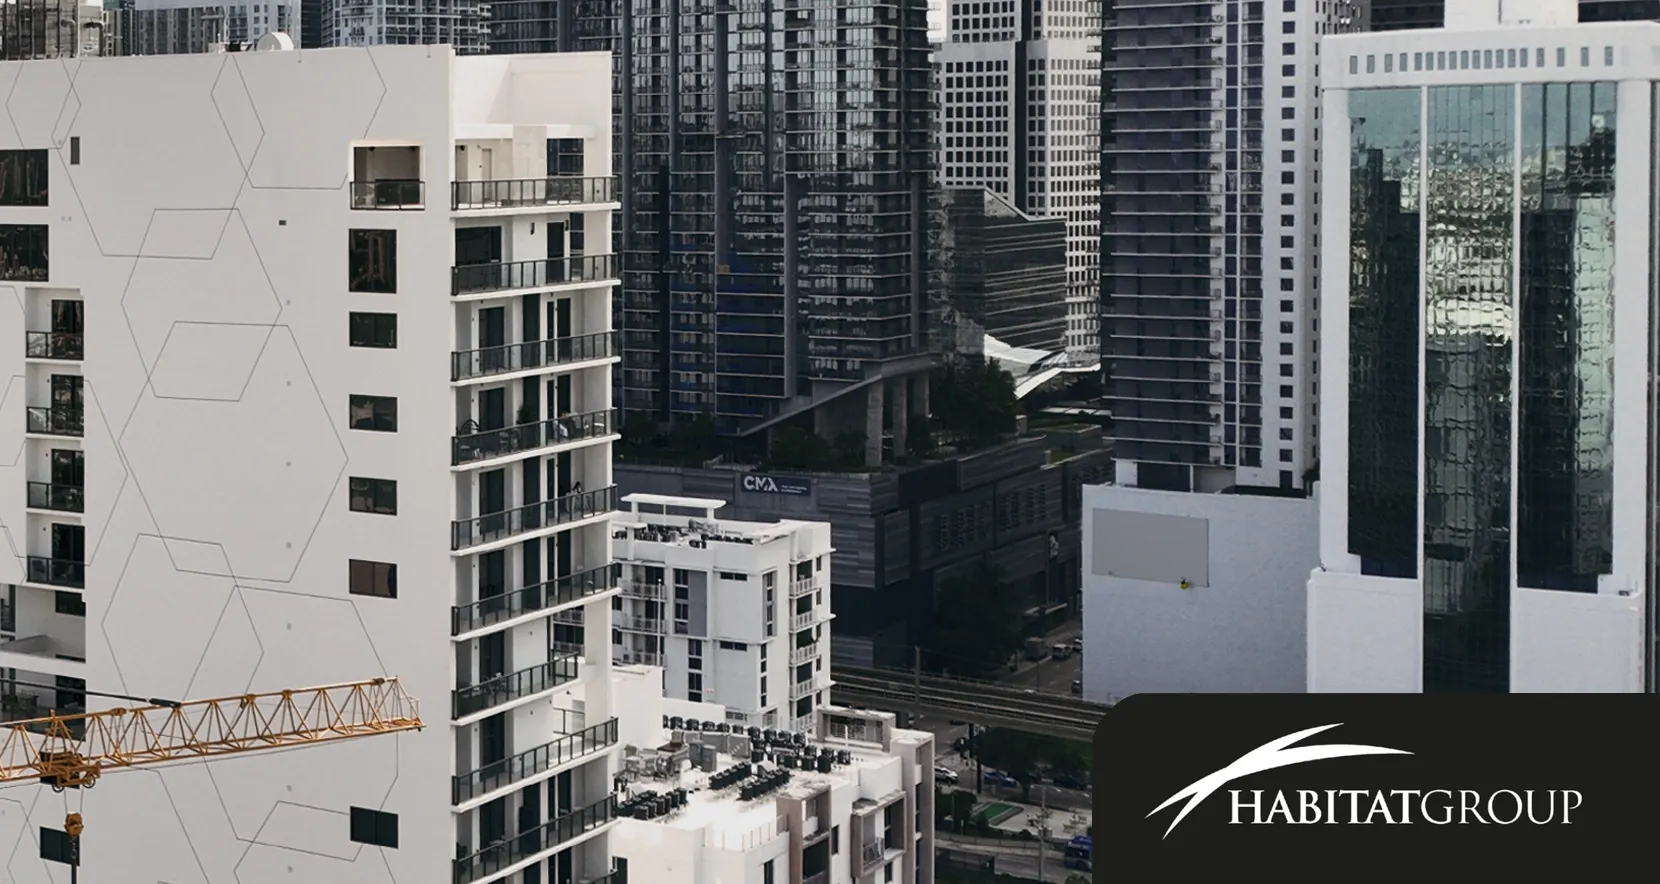 What Makes Smart Brickell Unique in the Real Estate Market?